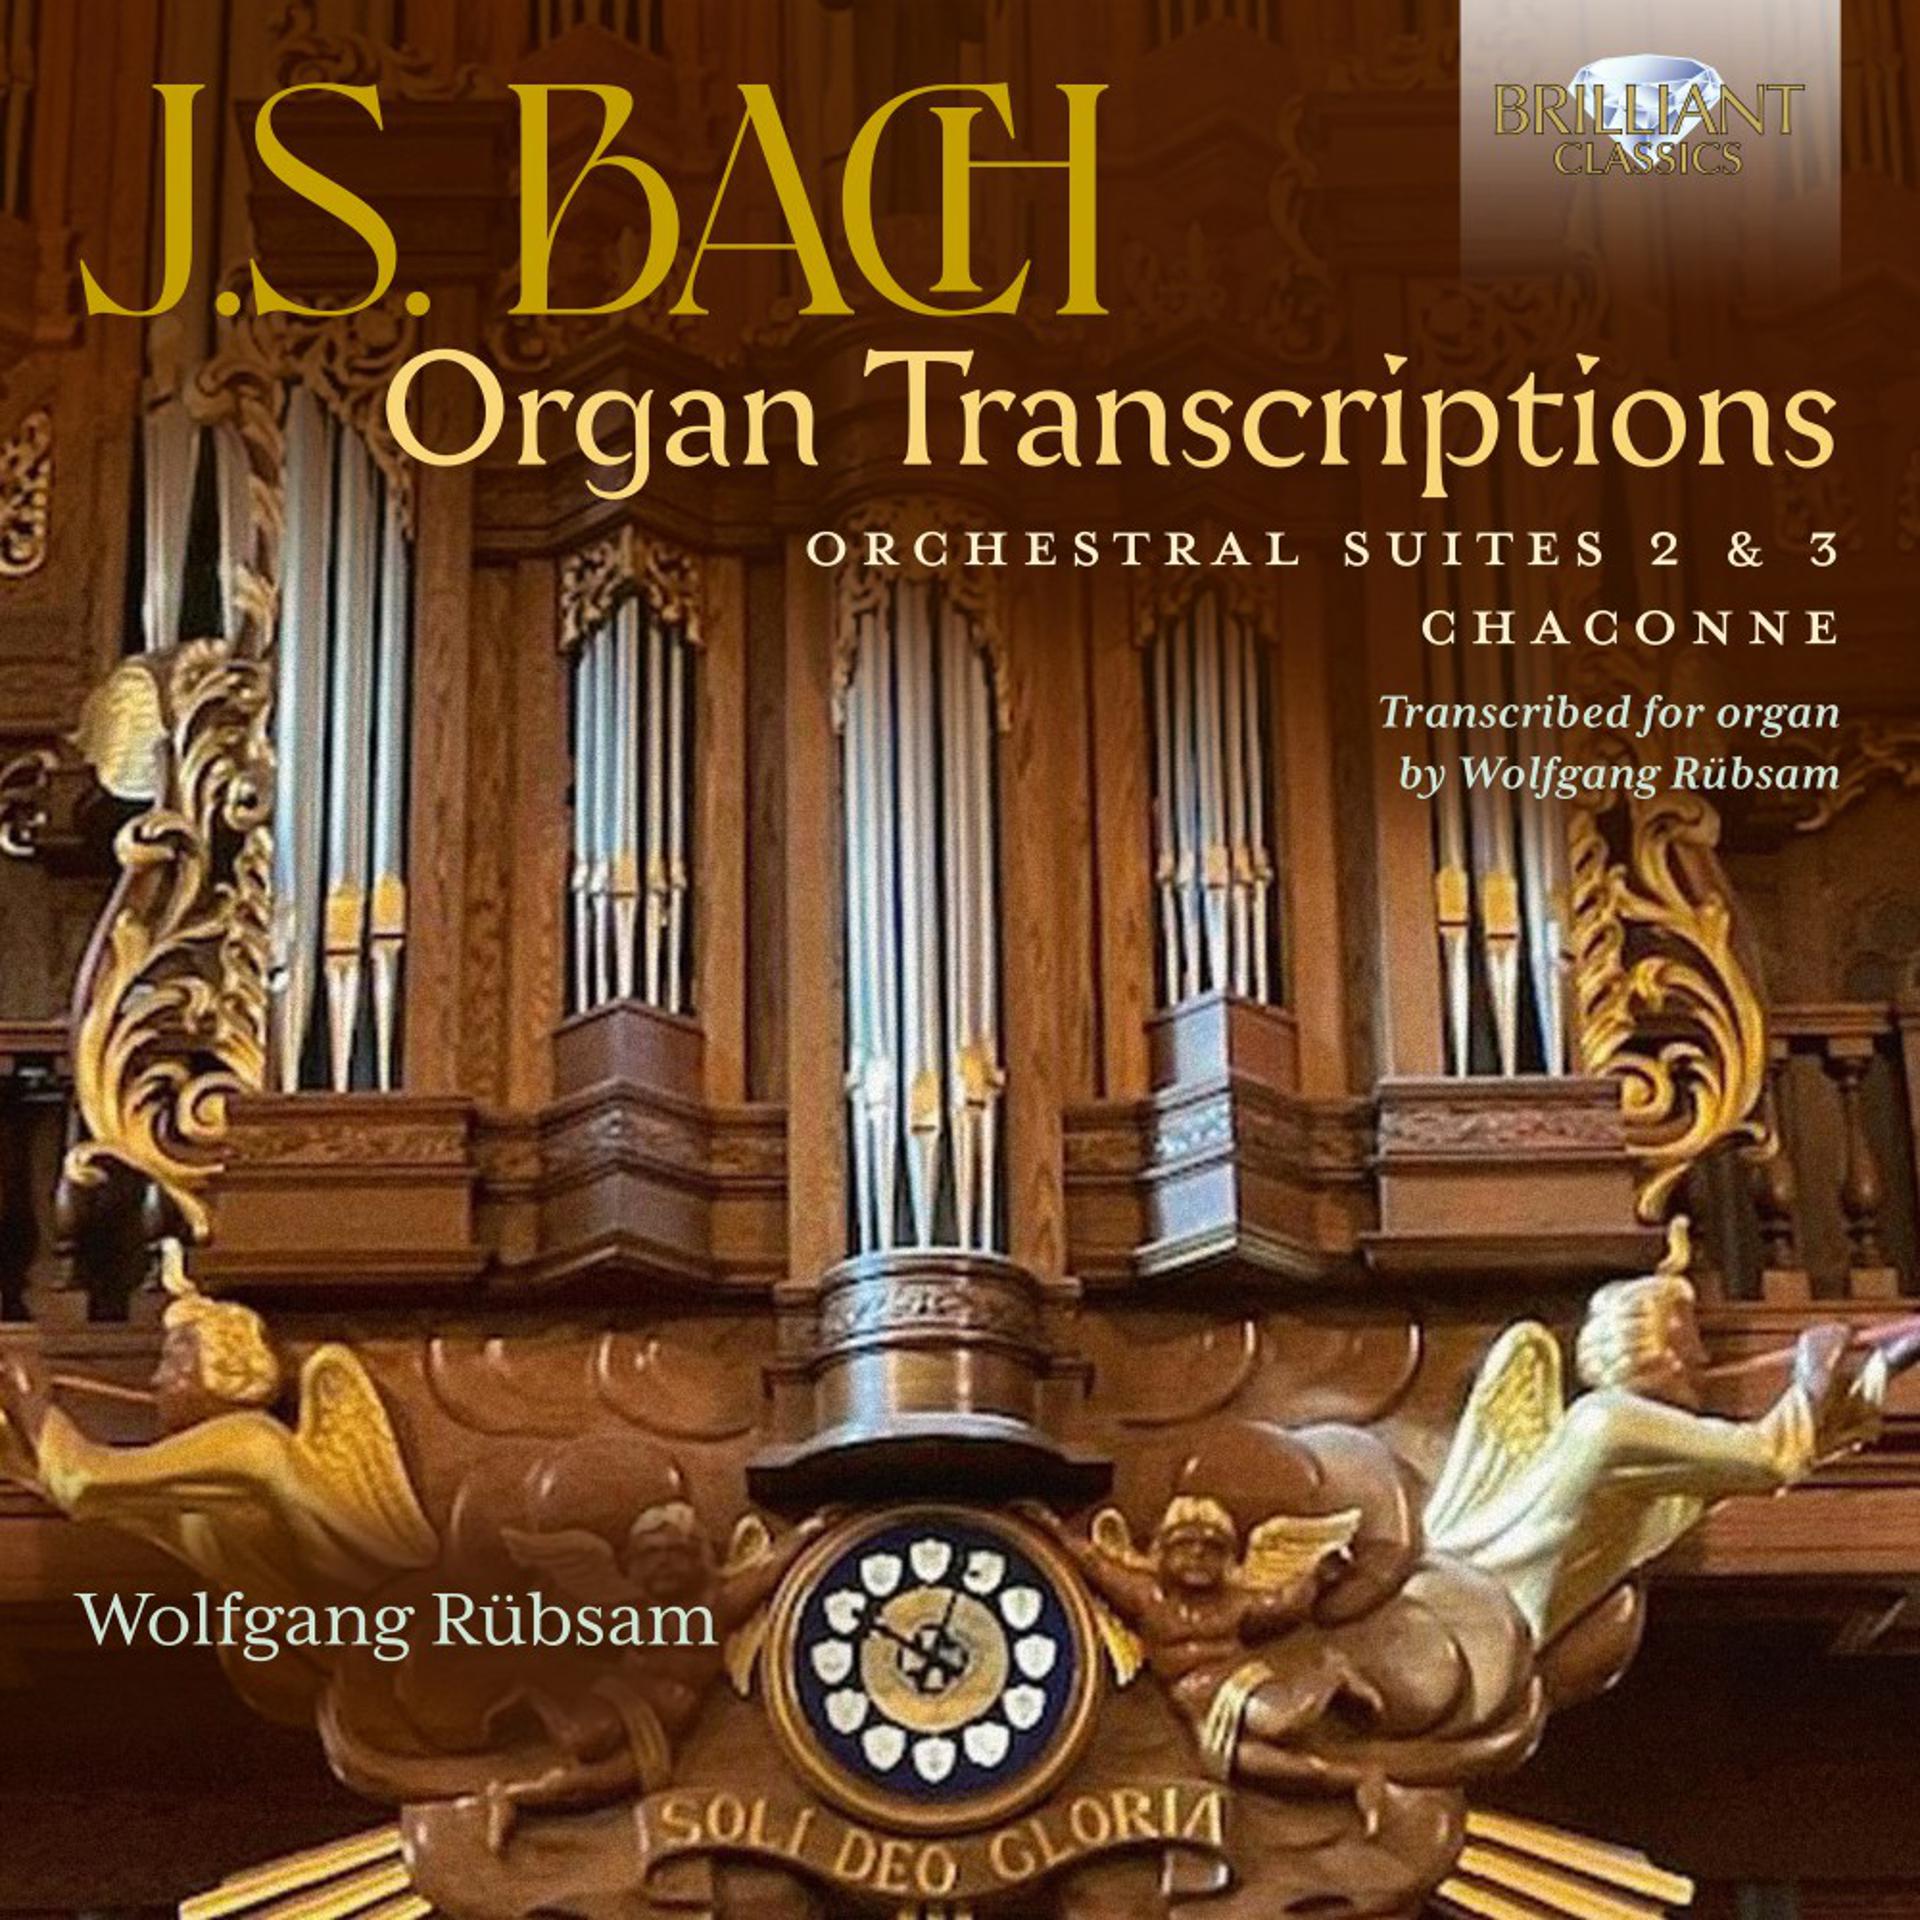 Постер альбома J.S. Bach: Organ Transcriptions. Orchestral Suites 2 & 3, Chaconne, Transcribed for Organ by Wolfgang Rübsam